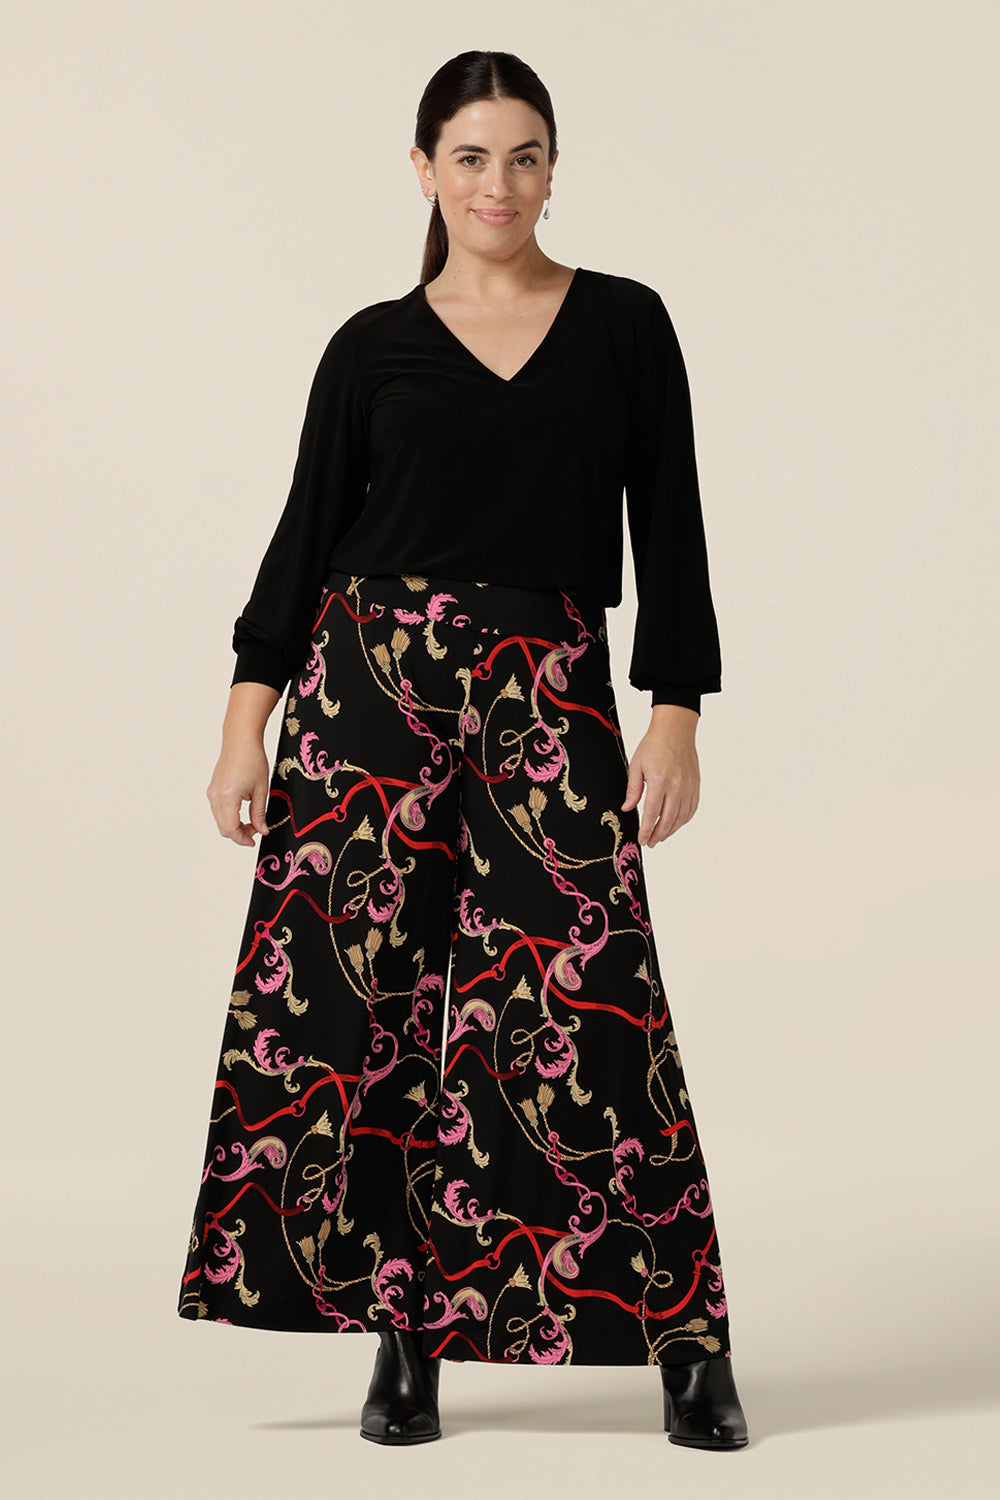 A size 10, petite height woman wears wide leg pull-on pants in rococo Tassel print stretch jersey. Comfortable pants for work and casual wear, these cropped trousers are made in Australia by women's clothing brand, Leina & Fleur.